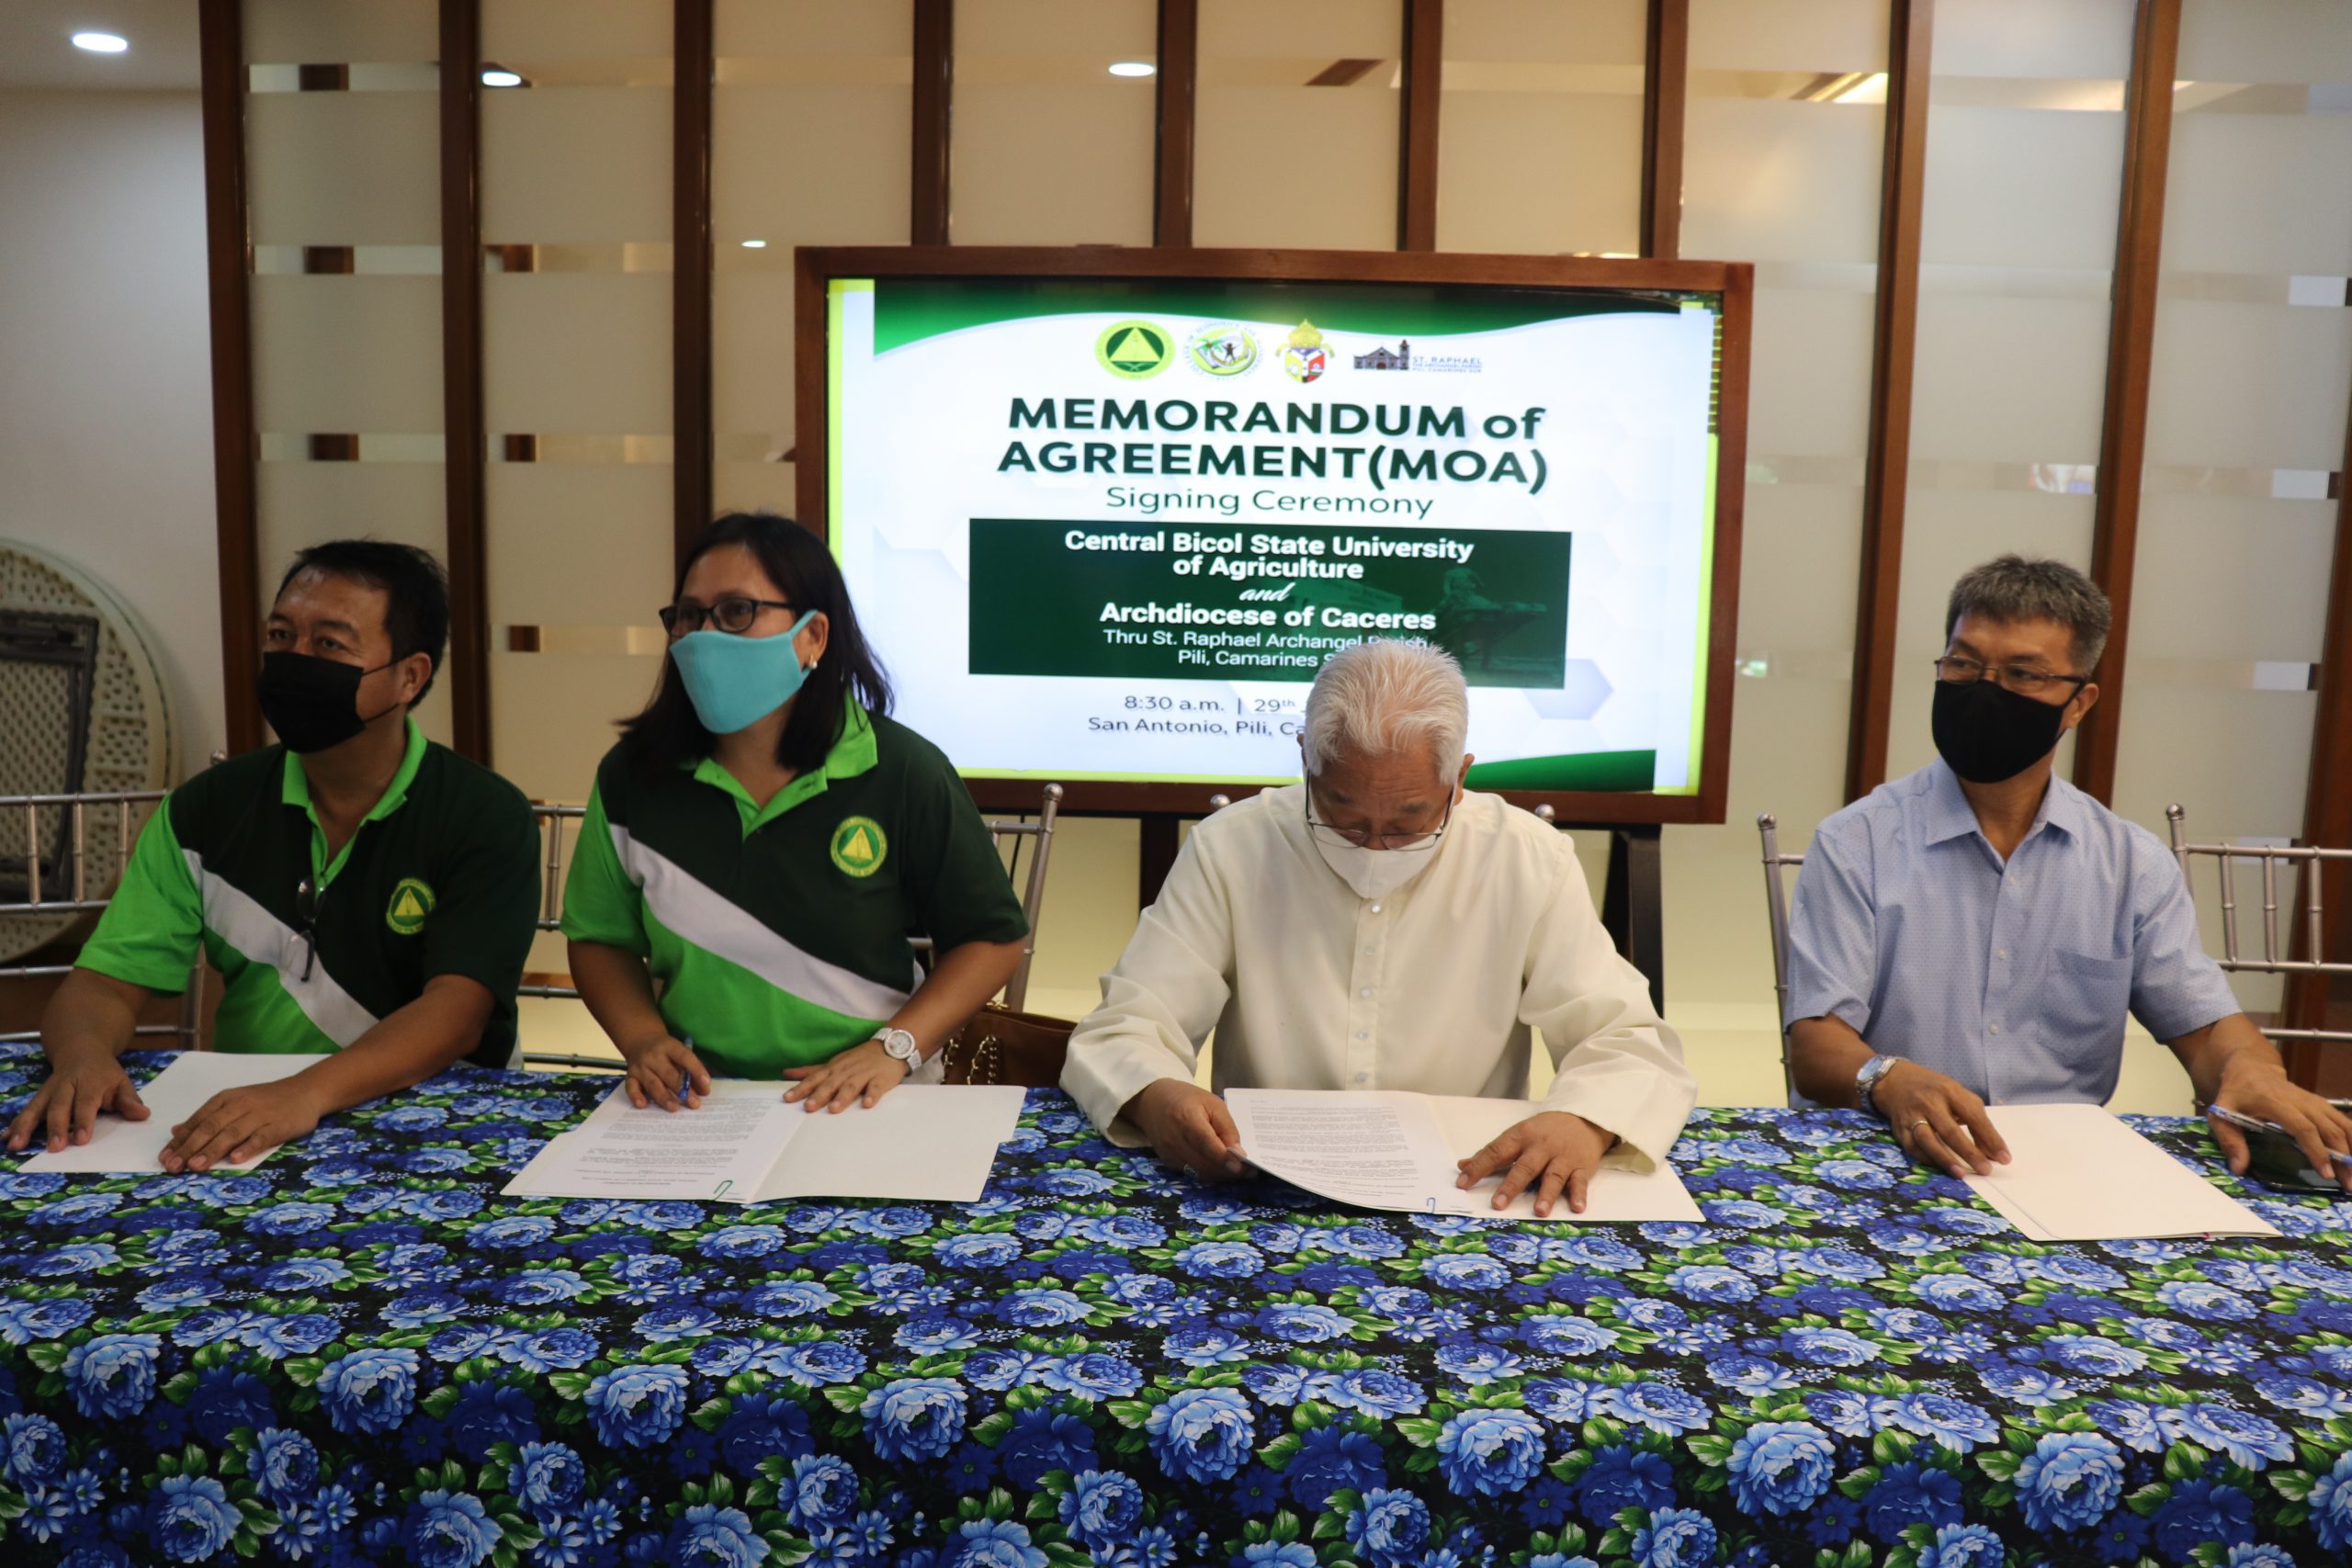 Memorandum of Agreement between CBSUA and Archdiocese of Caceres